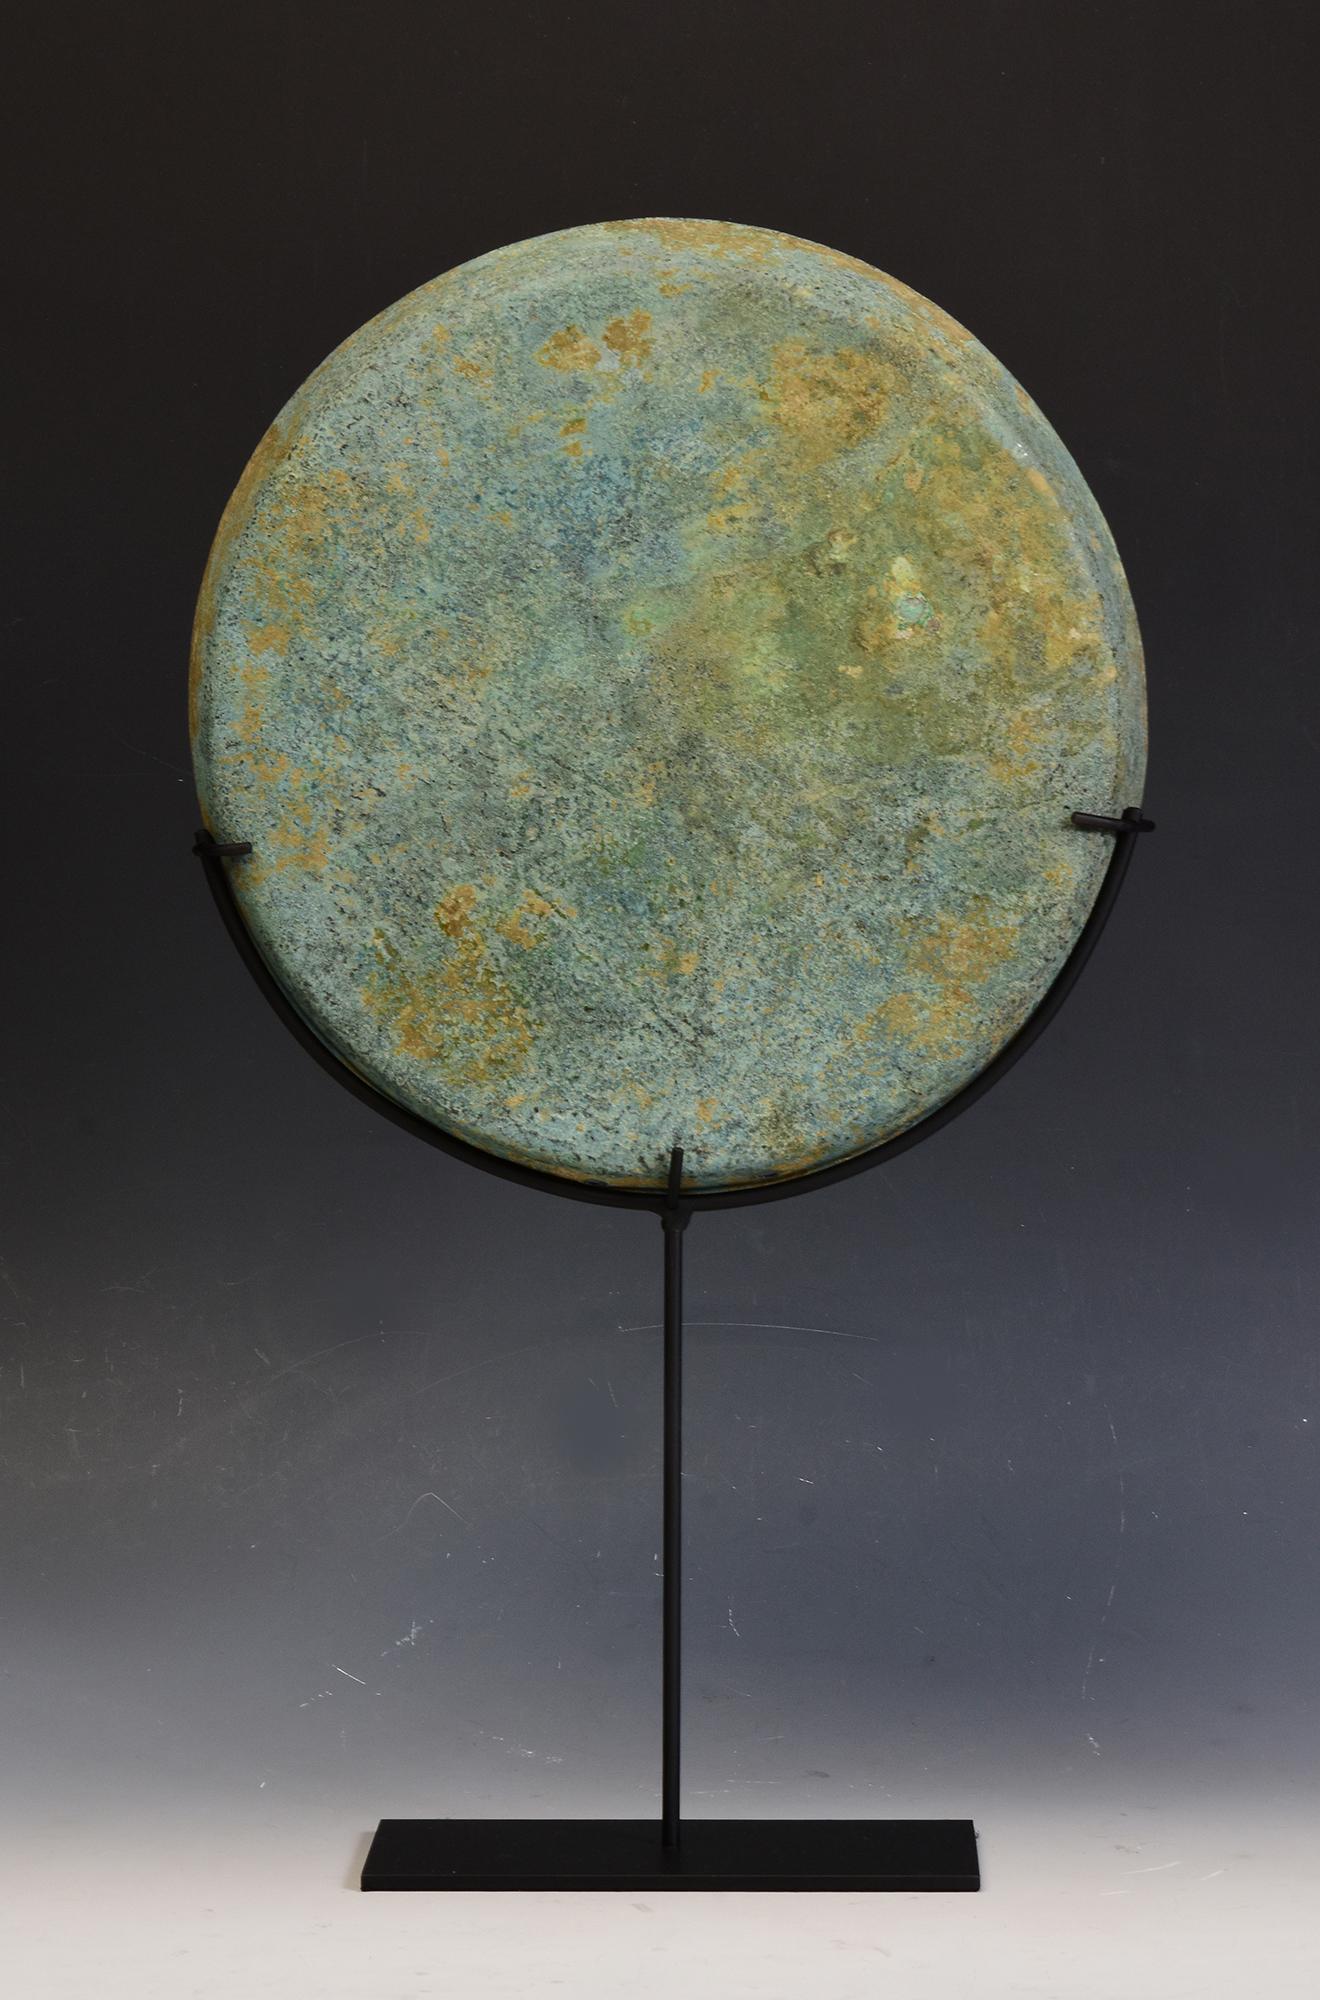 Antique Khmer bronze gong with nice green patina with stand.

Age: Cambodia, Angkor Vat Period, 12th Century
Size of gong only: Diameter 26.6 C.M. / Thickness 3 C.M.
Size including stand: Height 46 C.M.
Condition: Nice condition overall (some